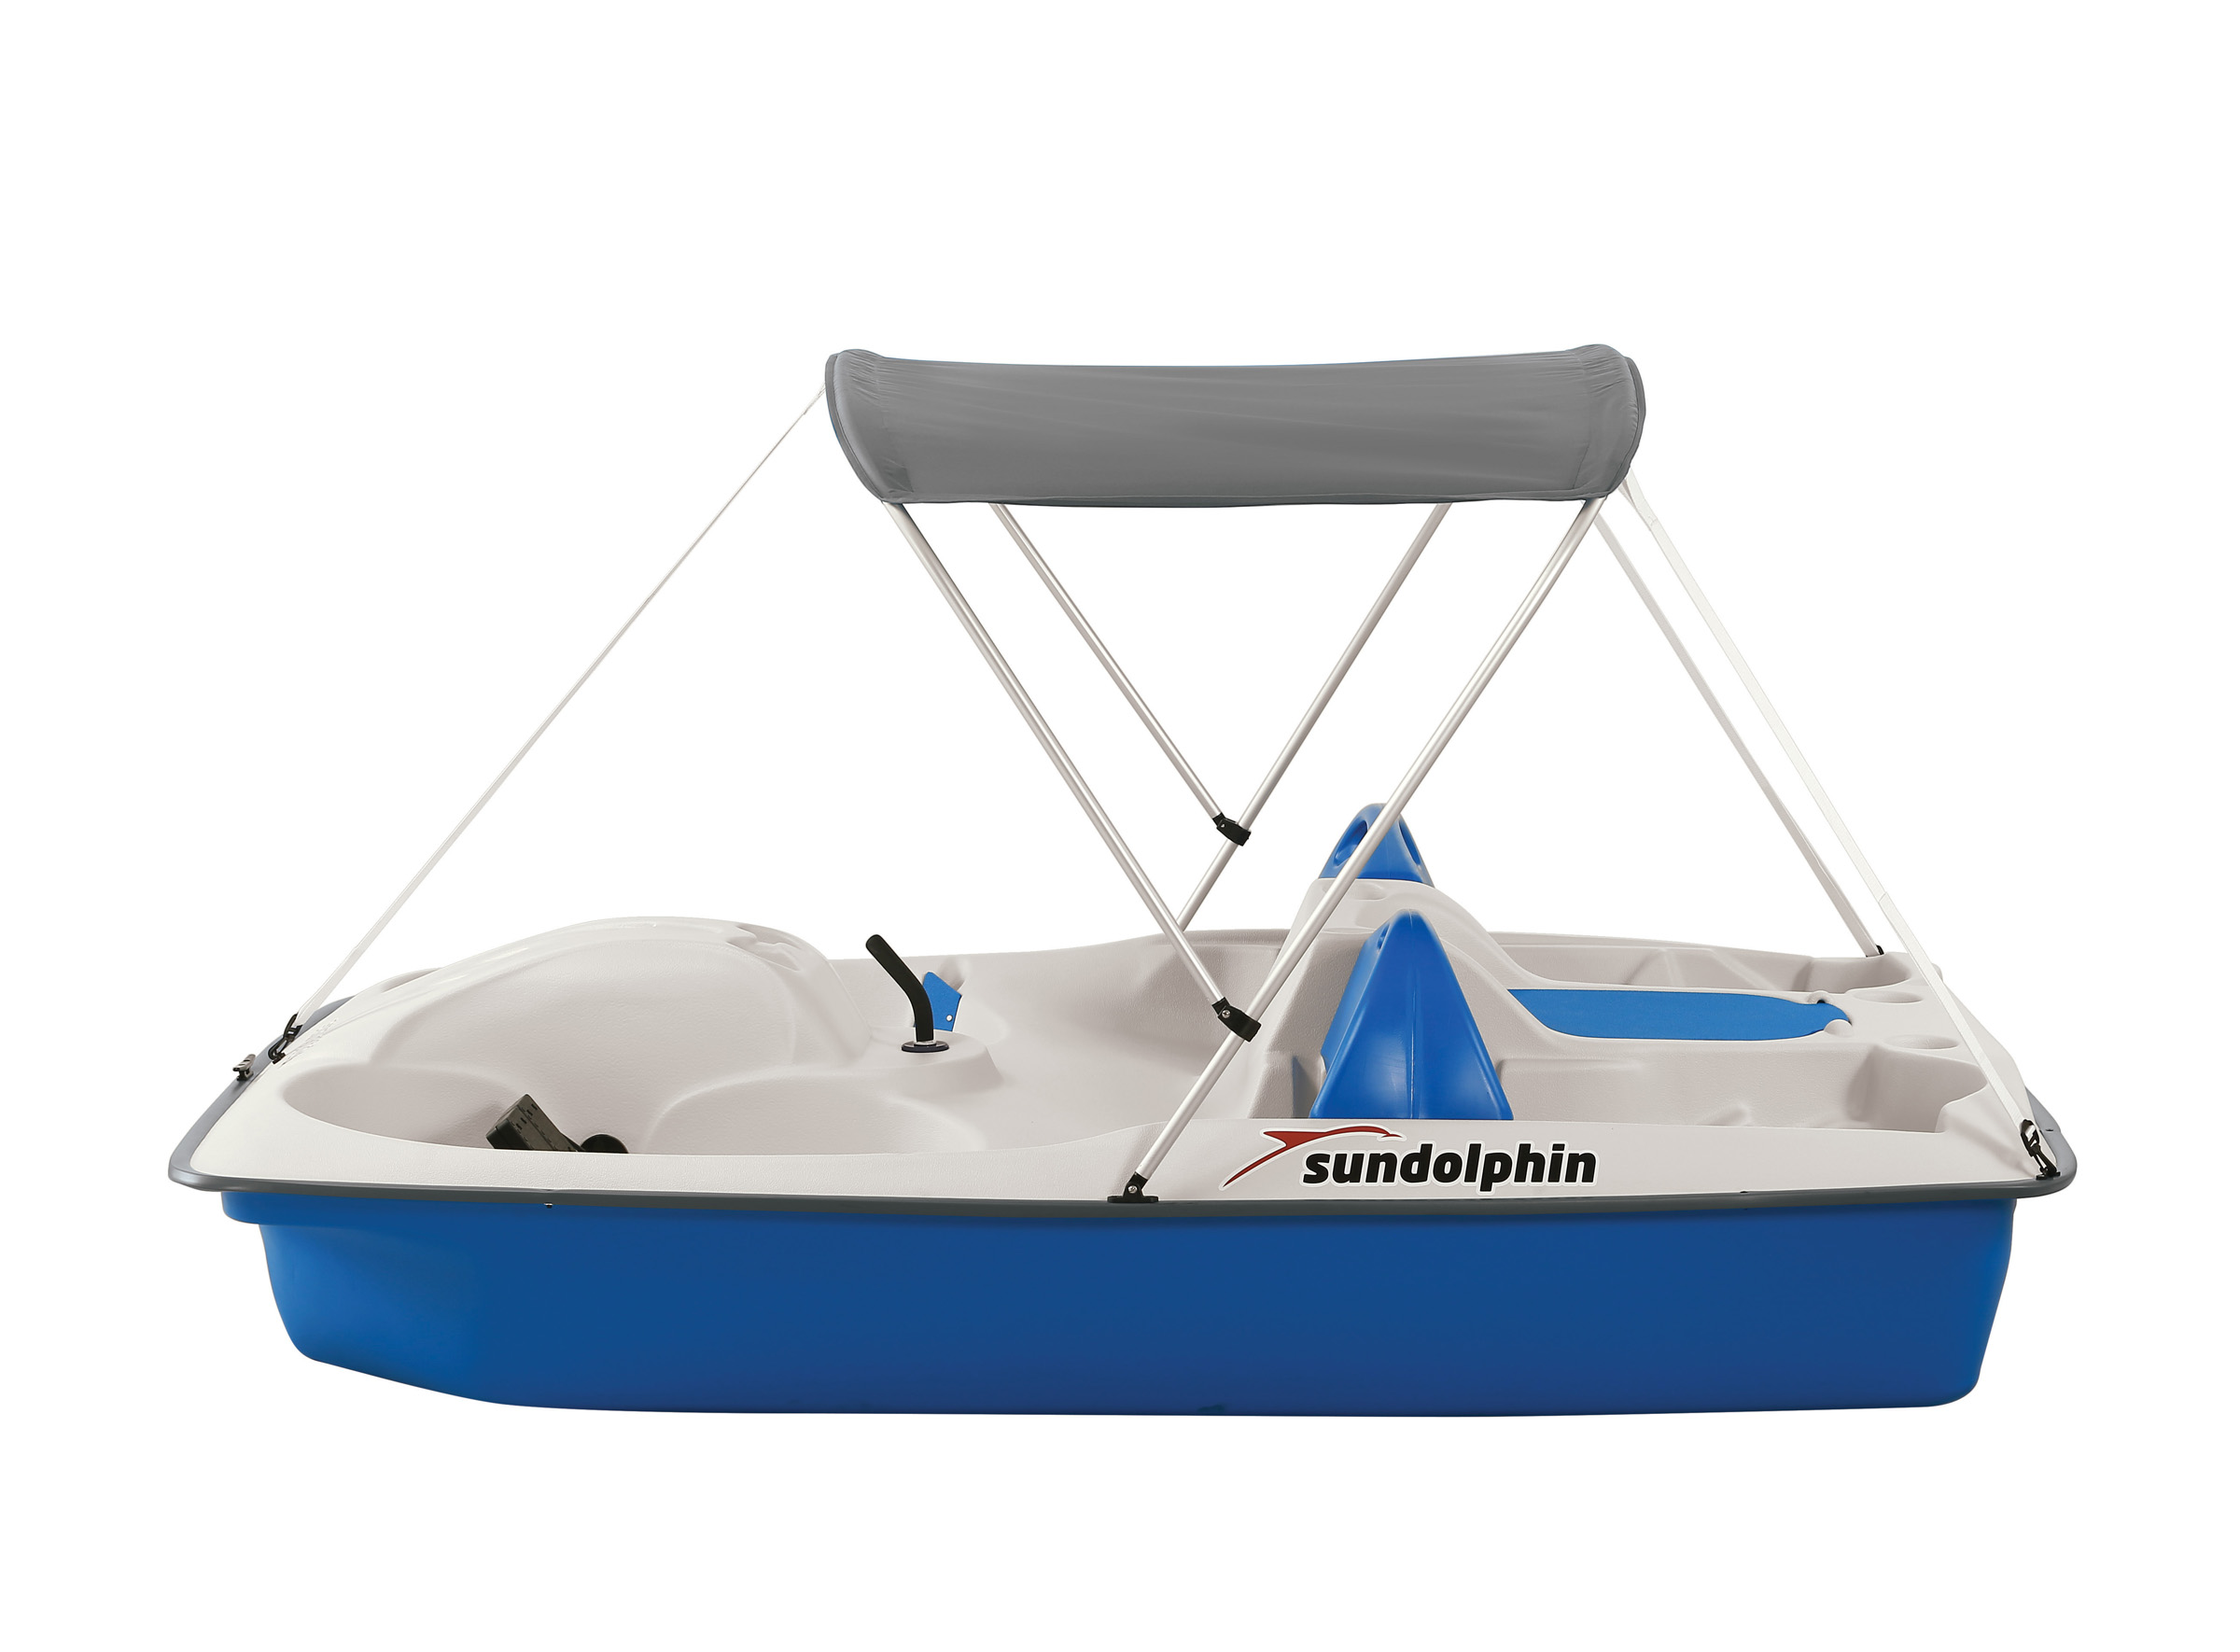 Sun Dolphin 5 Seat Sun Slider Pedal Boat with Canopy, Blue - image 3 of 6